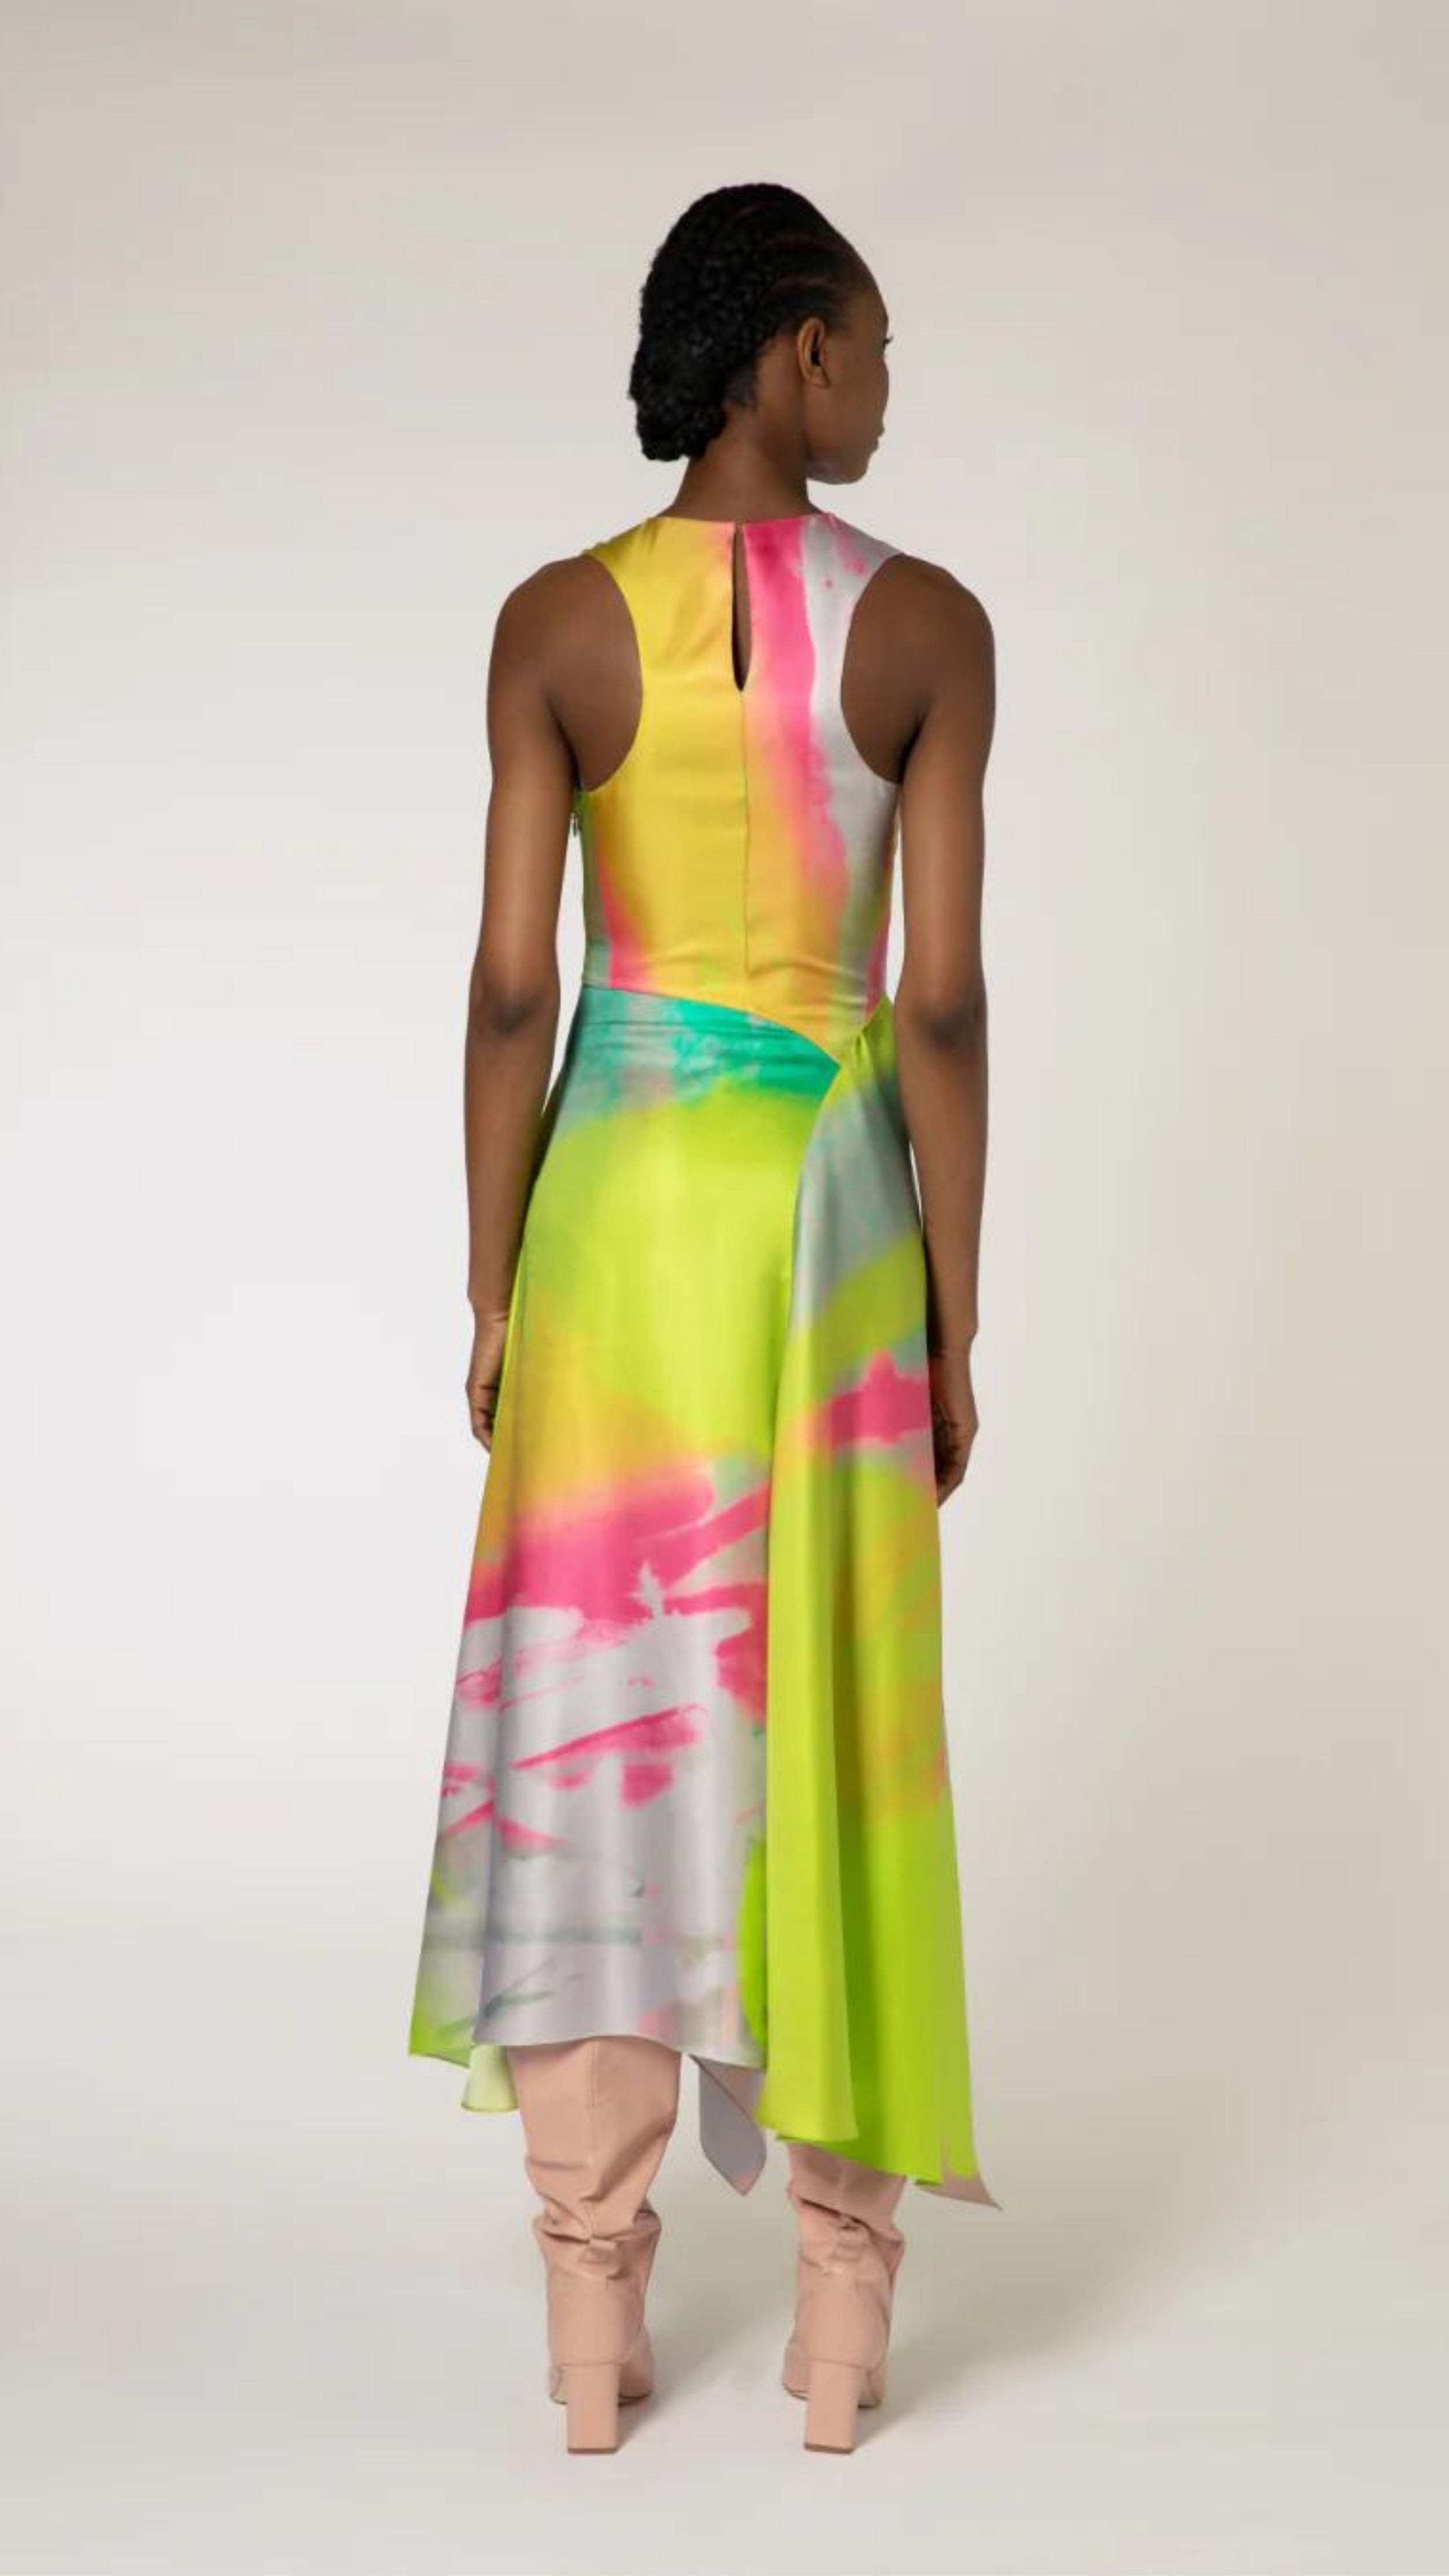 Roksanda Zenobia Dress. Fresh modern style silk twill dress in neon limes, pinks and soft blue. With an racer back style top, asymetrical dropped waist and midi length loose fitting skirt. Shown on model facing back.